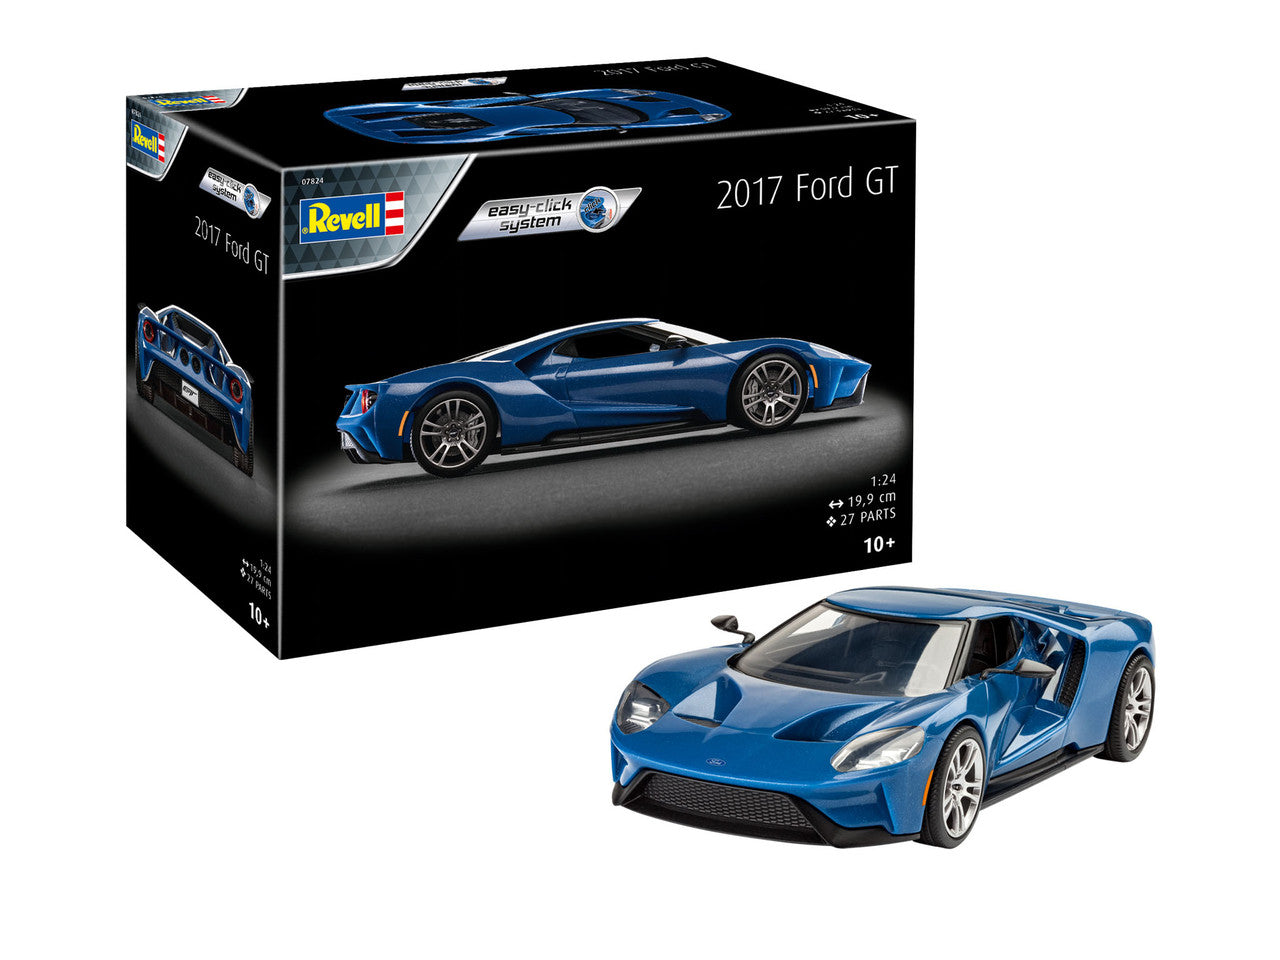 Easy-Click 2017 Ford GT - Loaded Dice